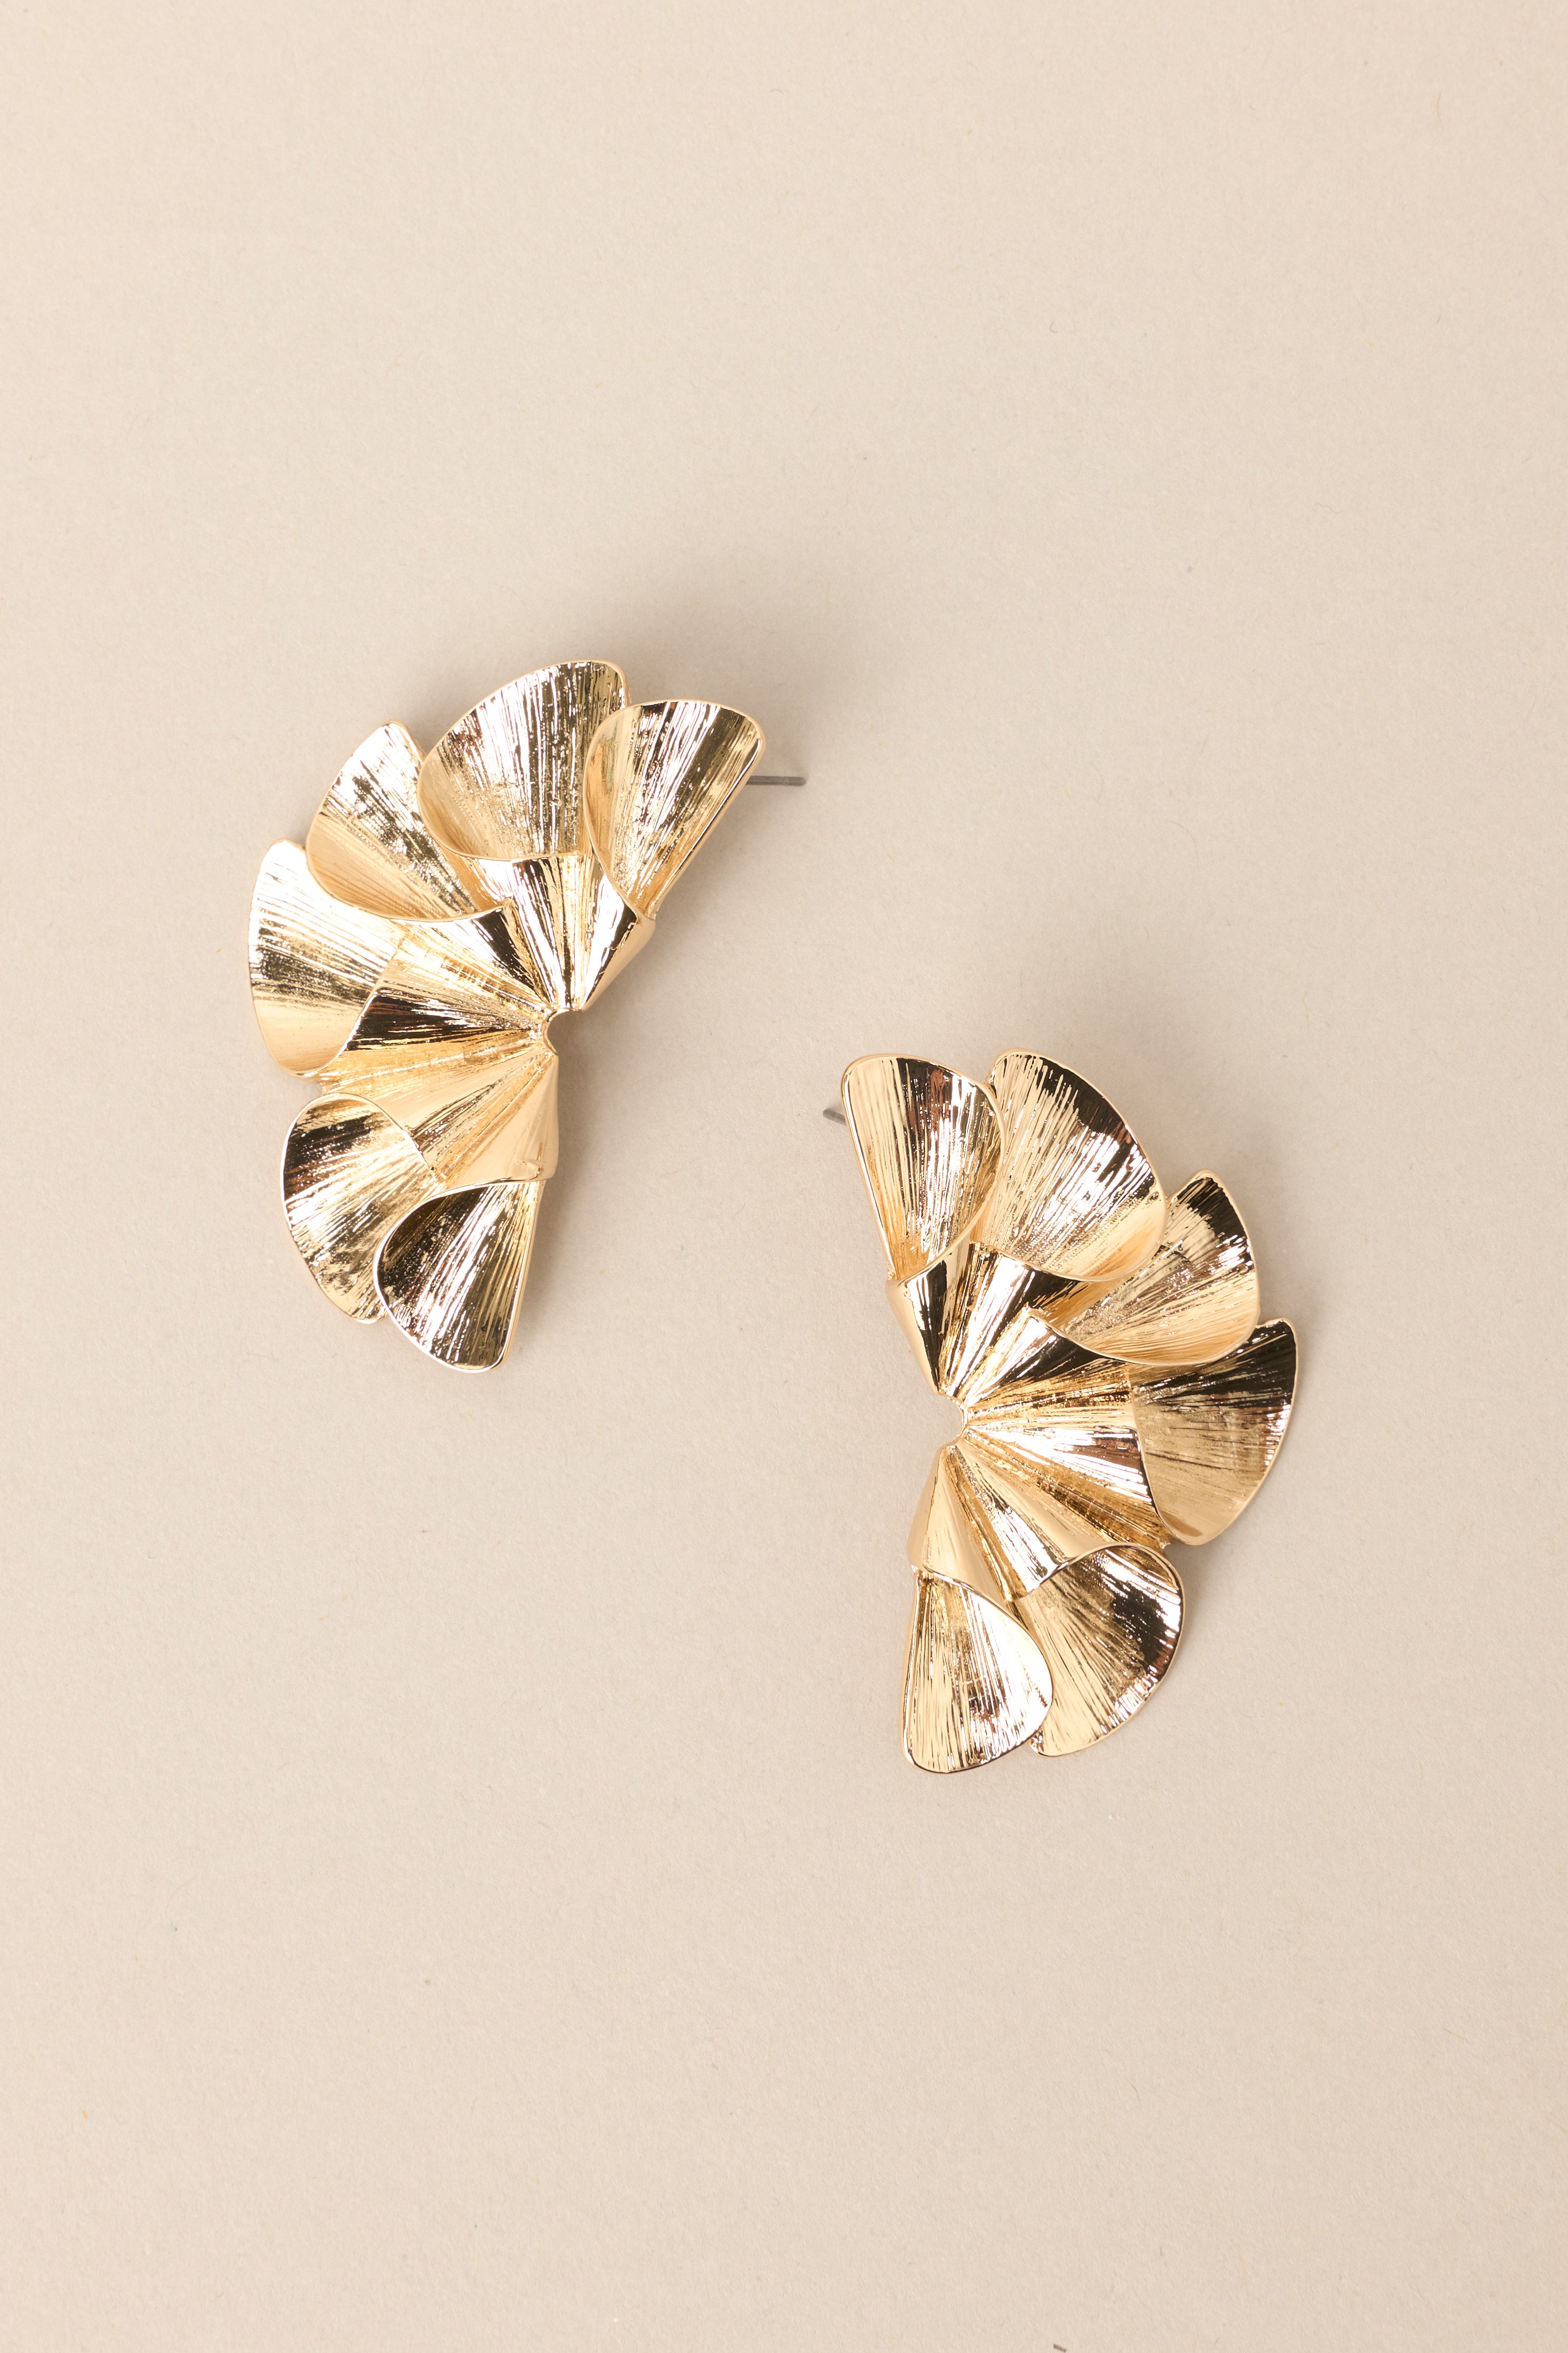 Top view of these earrings that feature gold hardware, a unique and abstract design, and secure post backings.